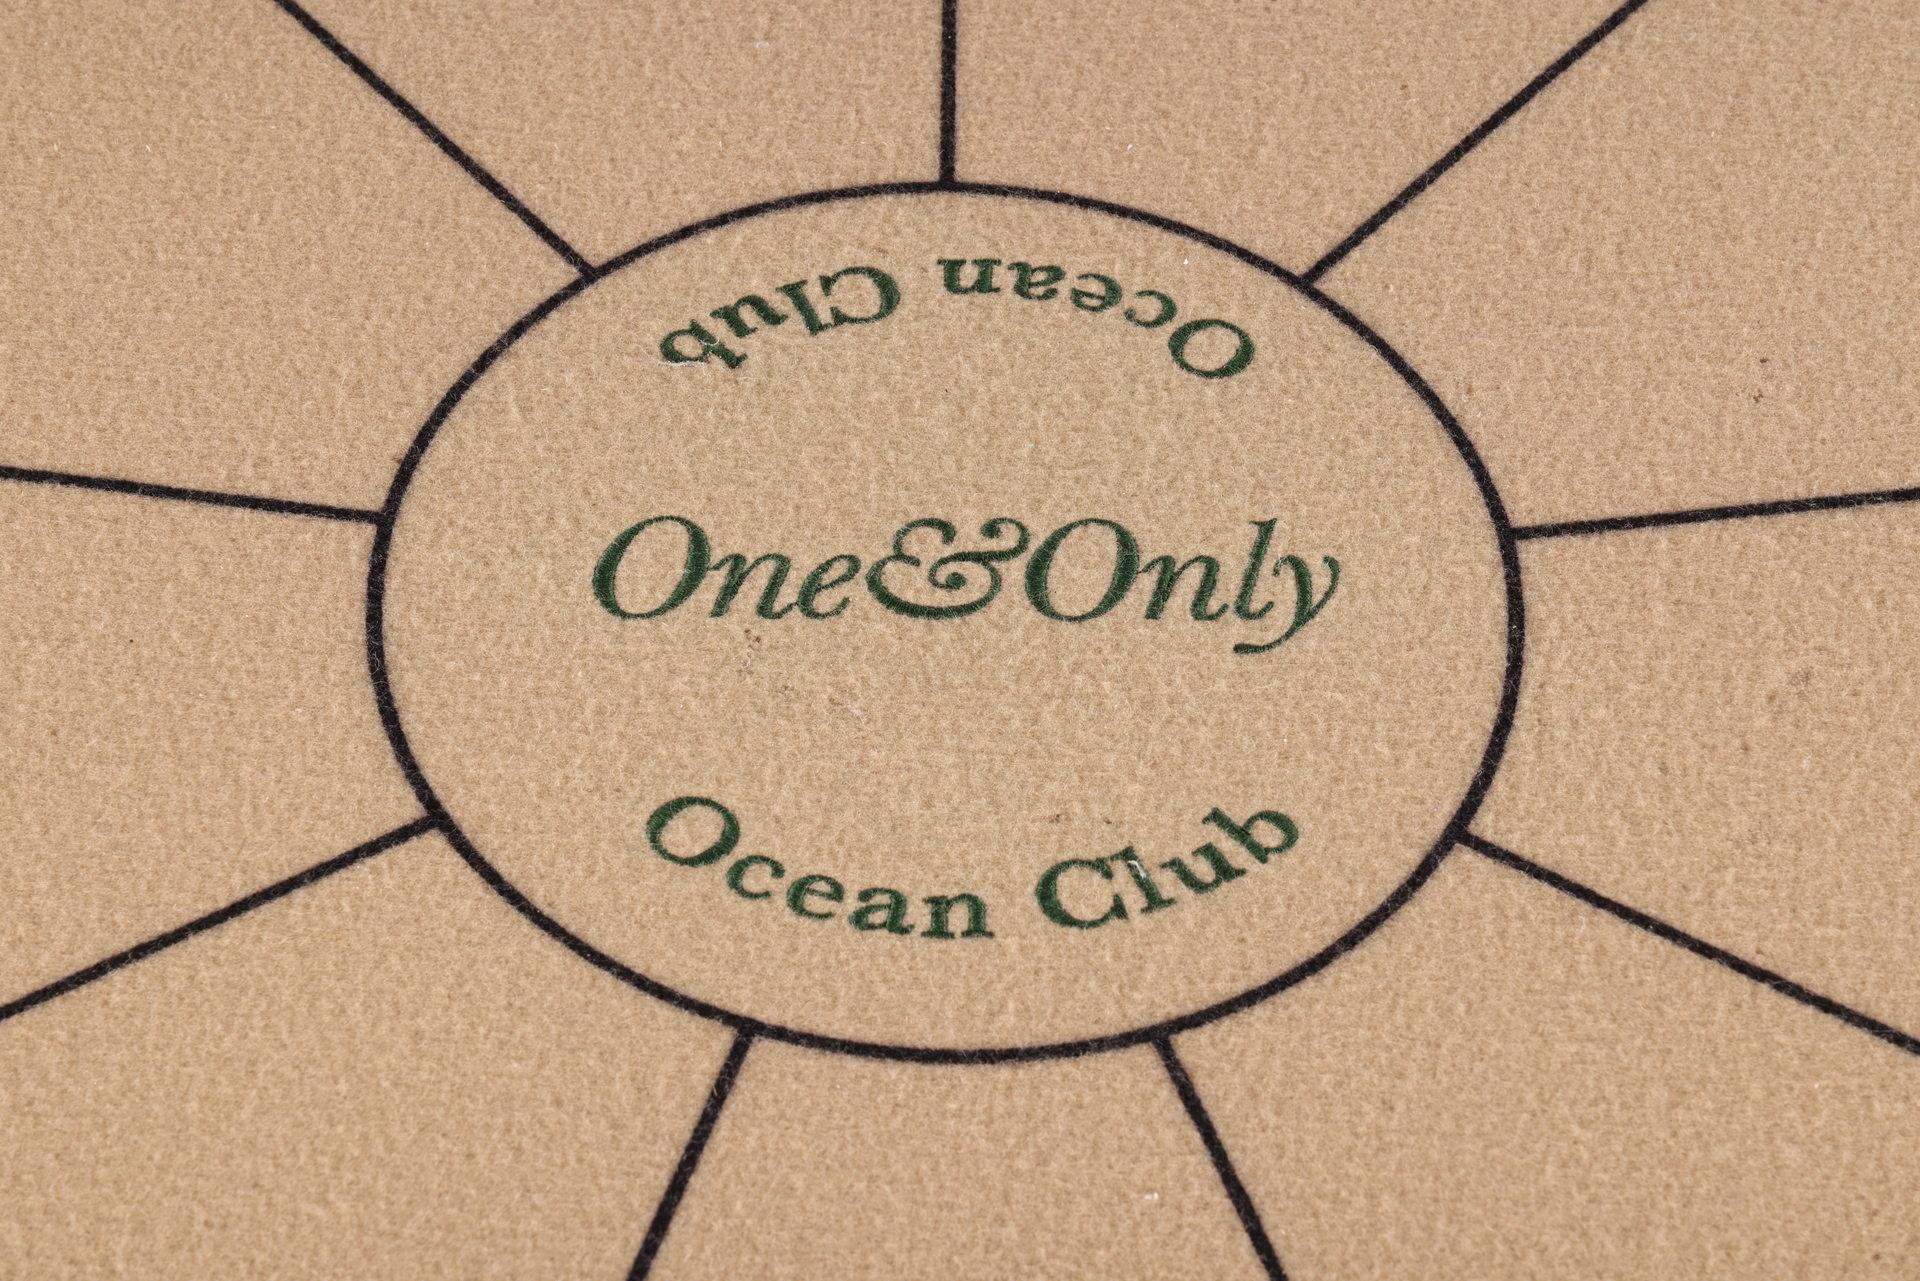 JAMES BOND: CASINO ROYALE (2006) - One & Only Ocean Club Poker Table, Chips and Playing Cards - Image 11 of 16